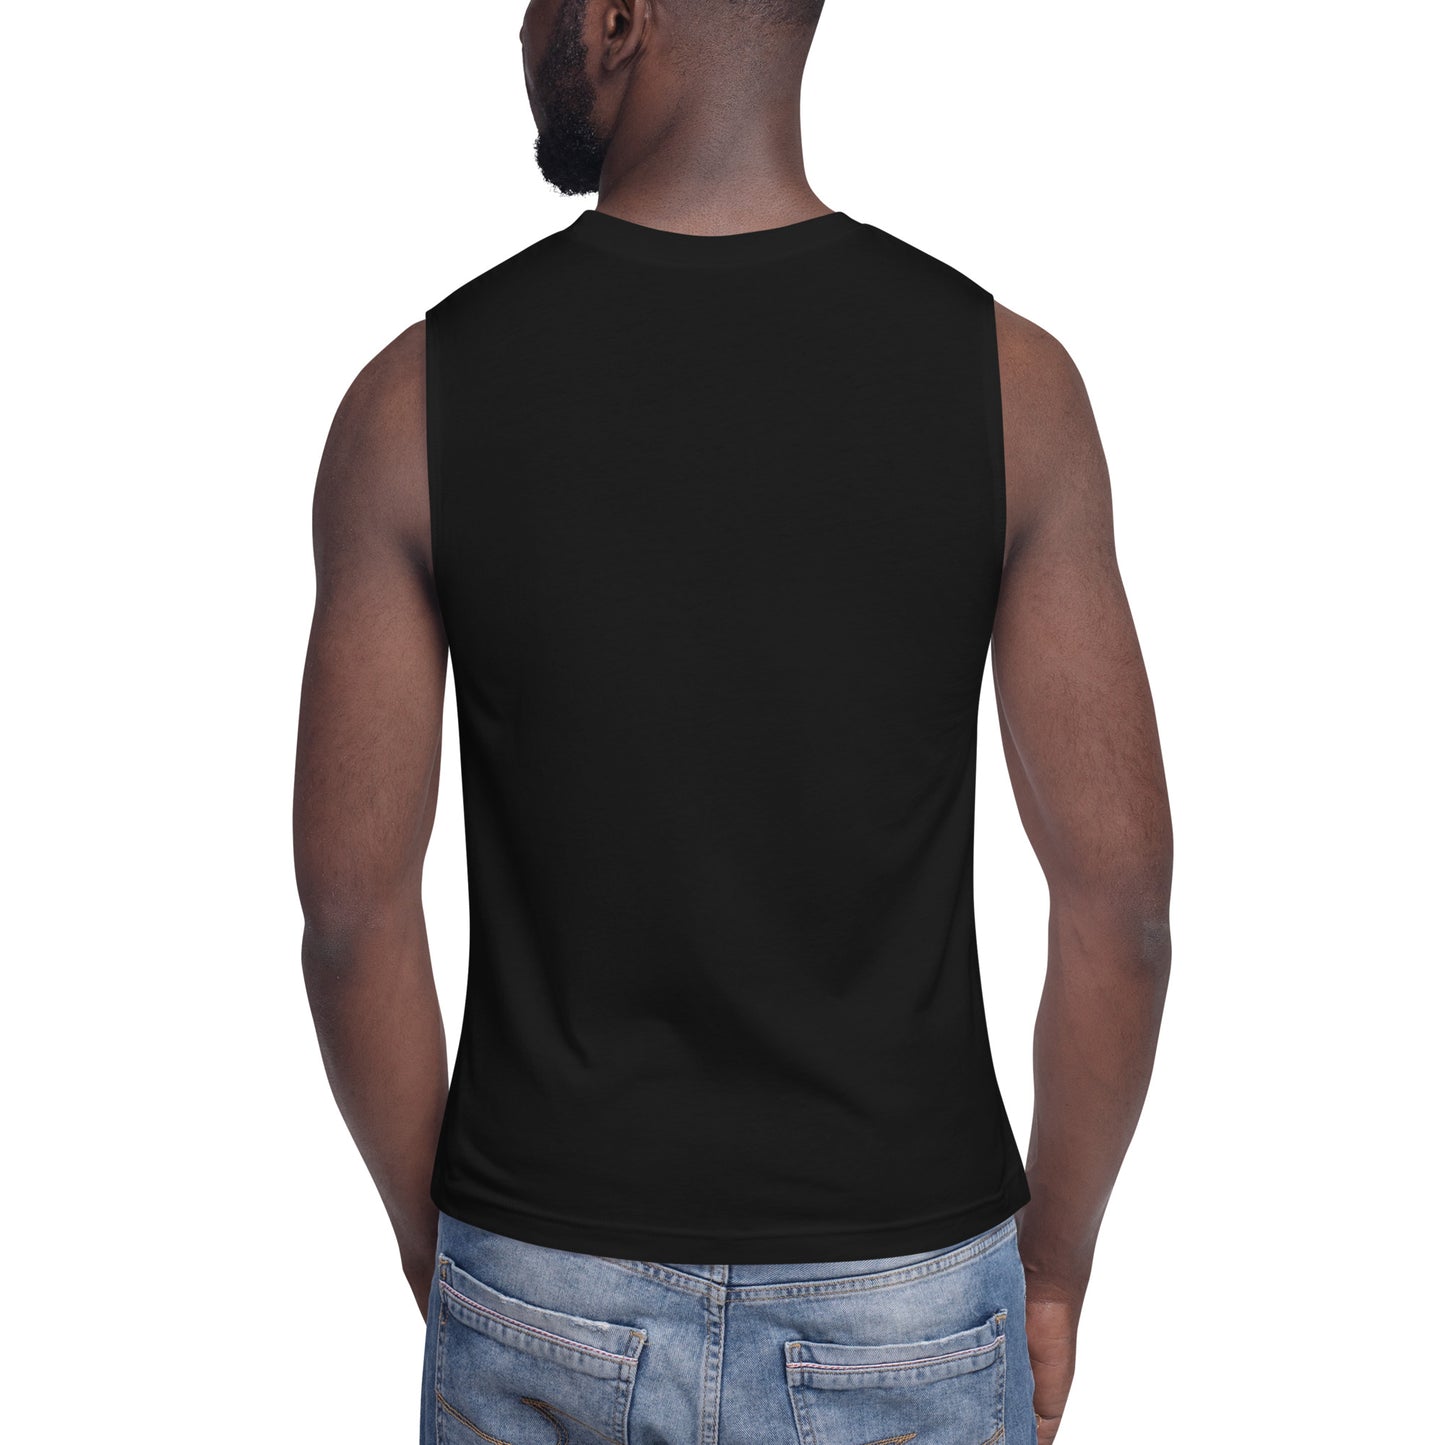 GIFTED Muscle Shirt